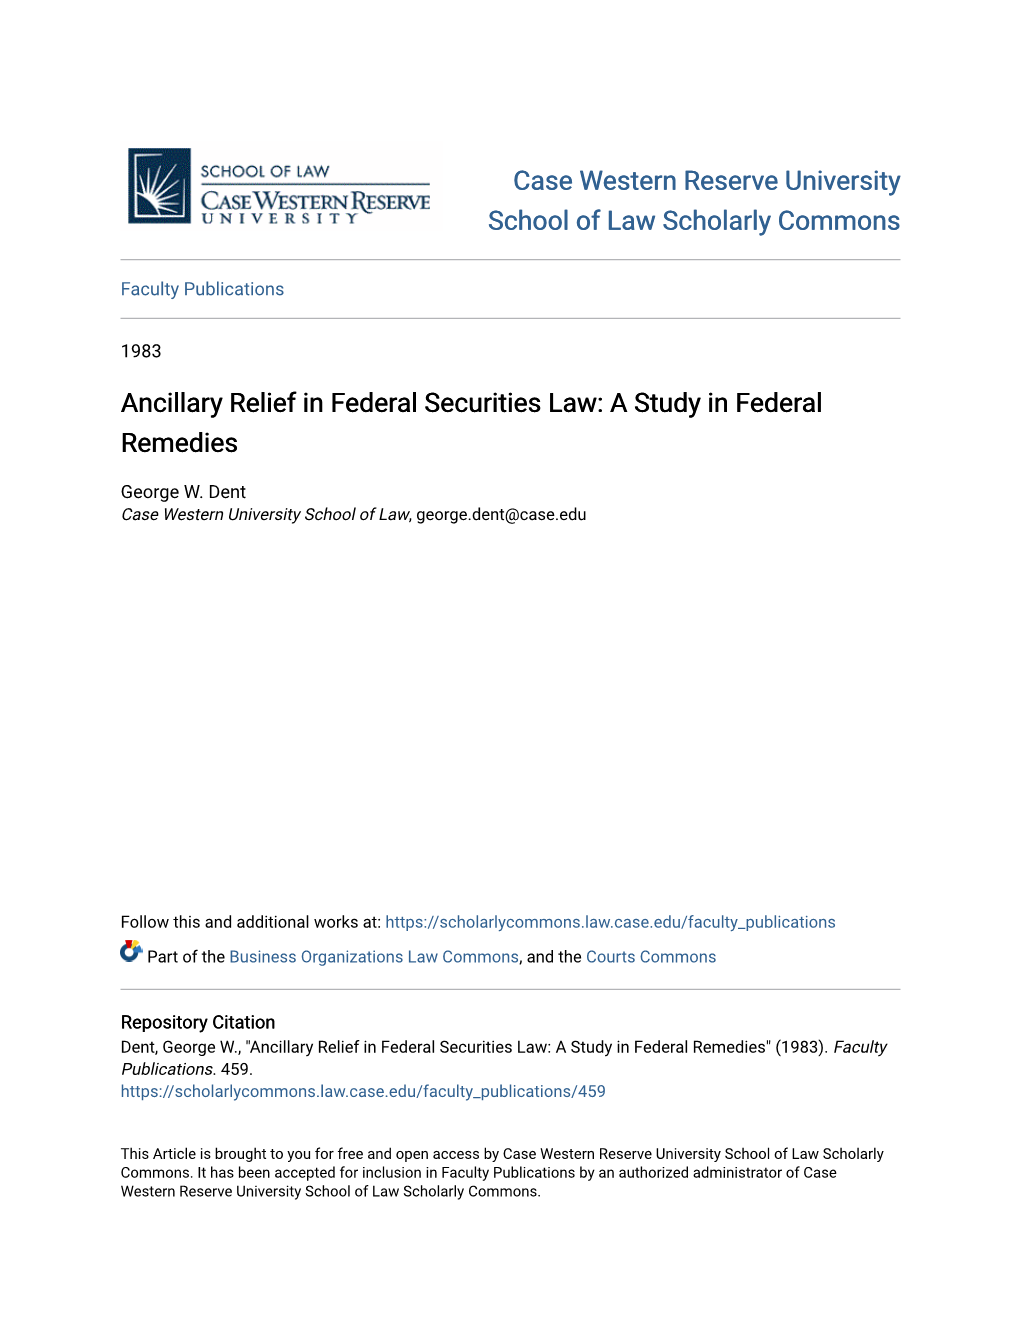 Ancillary Relief in Federal Securities Law: a Study in Federal Remedies